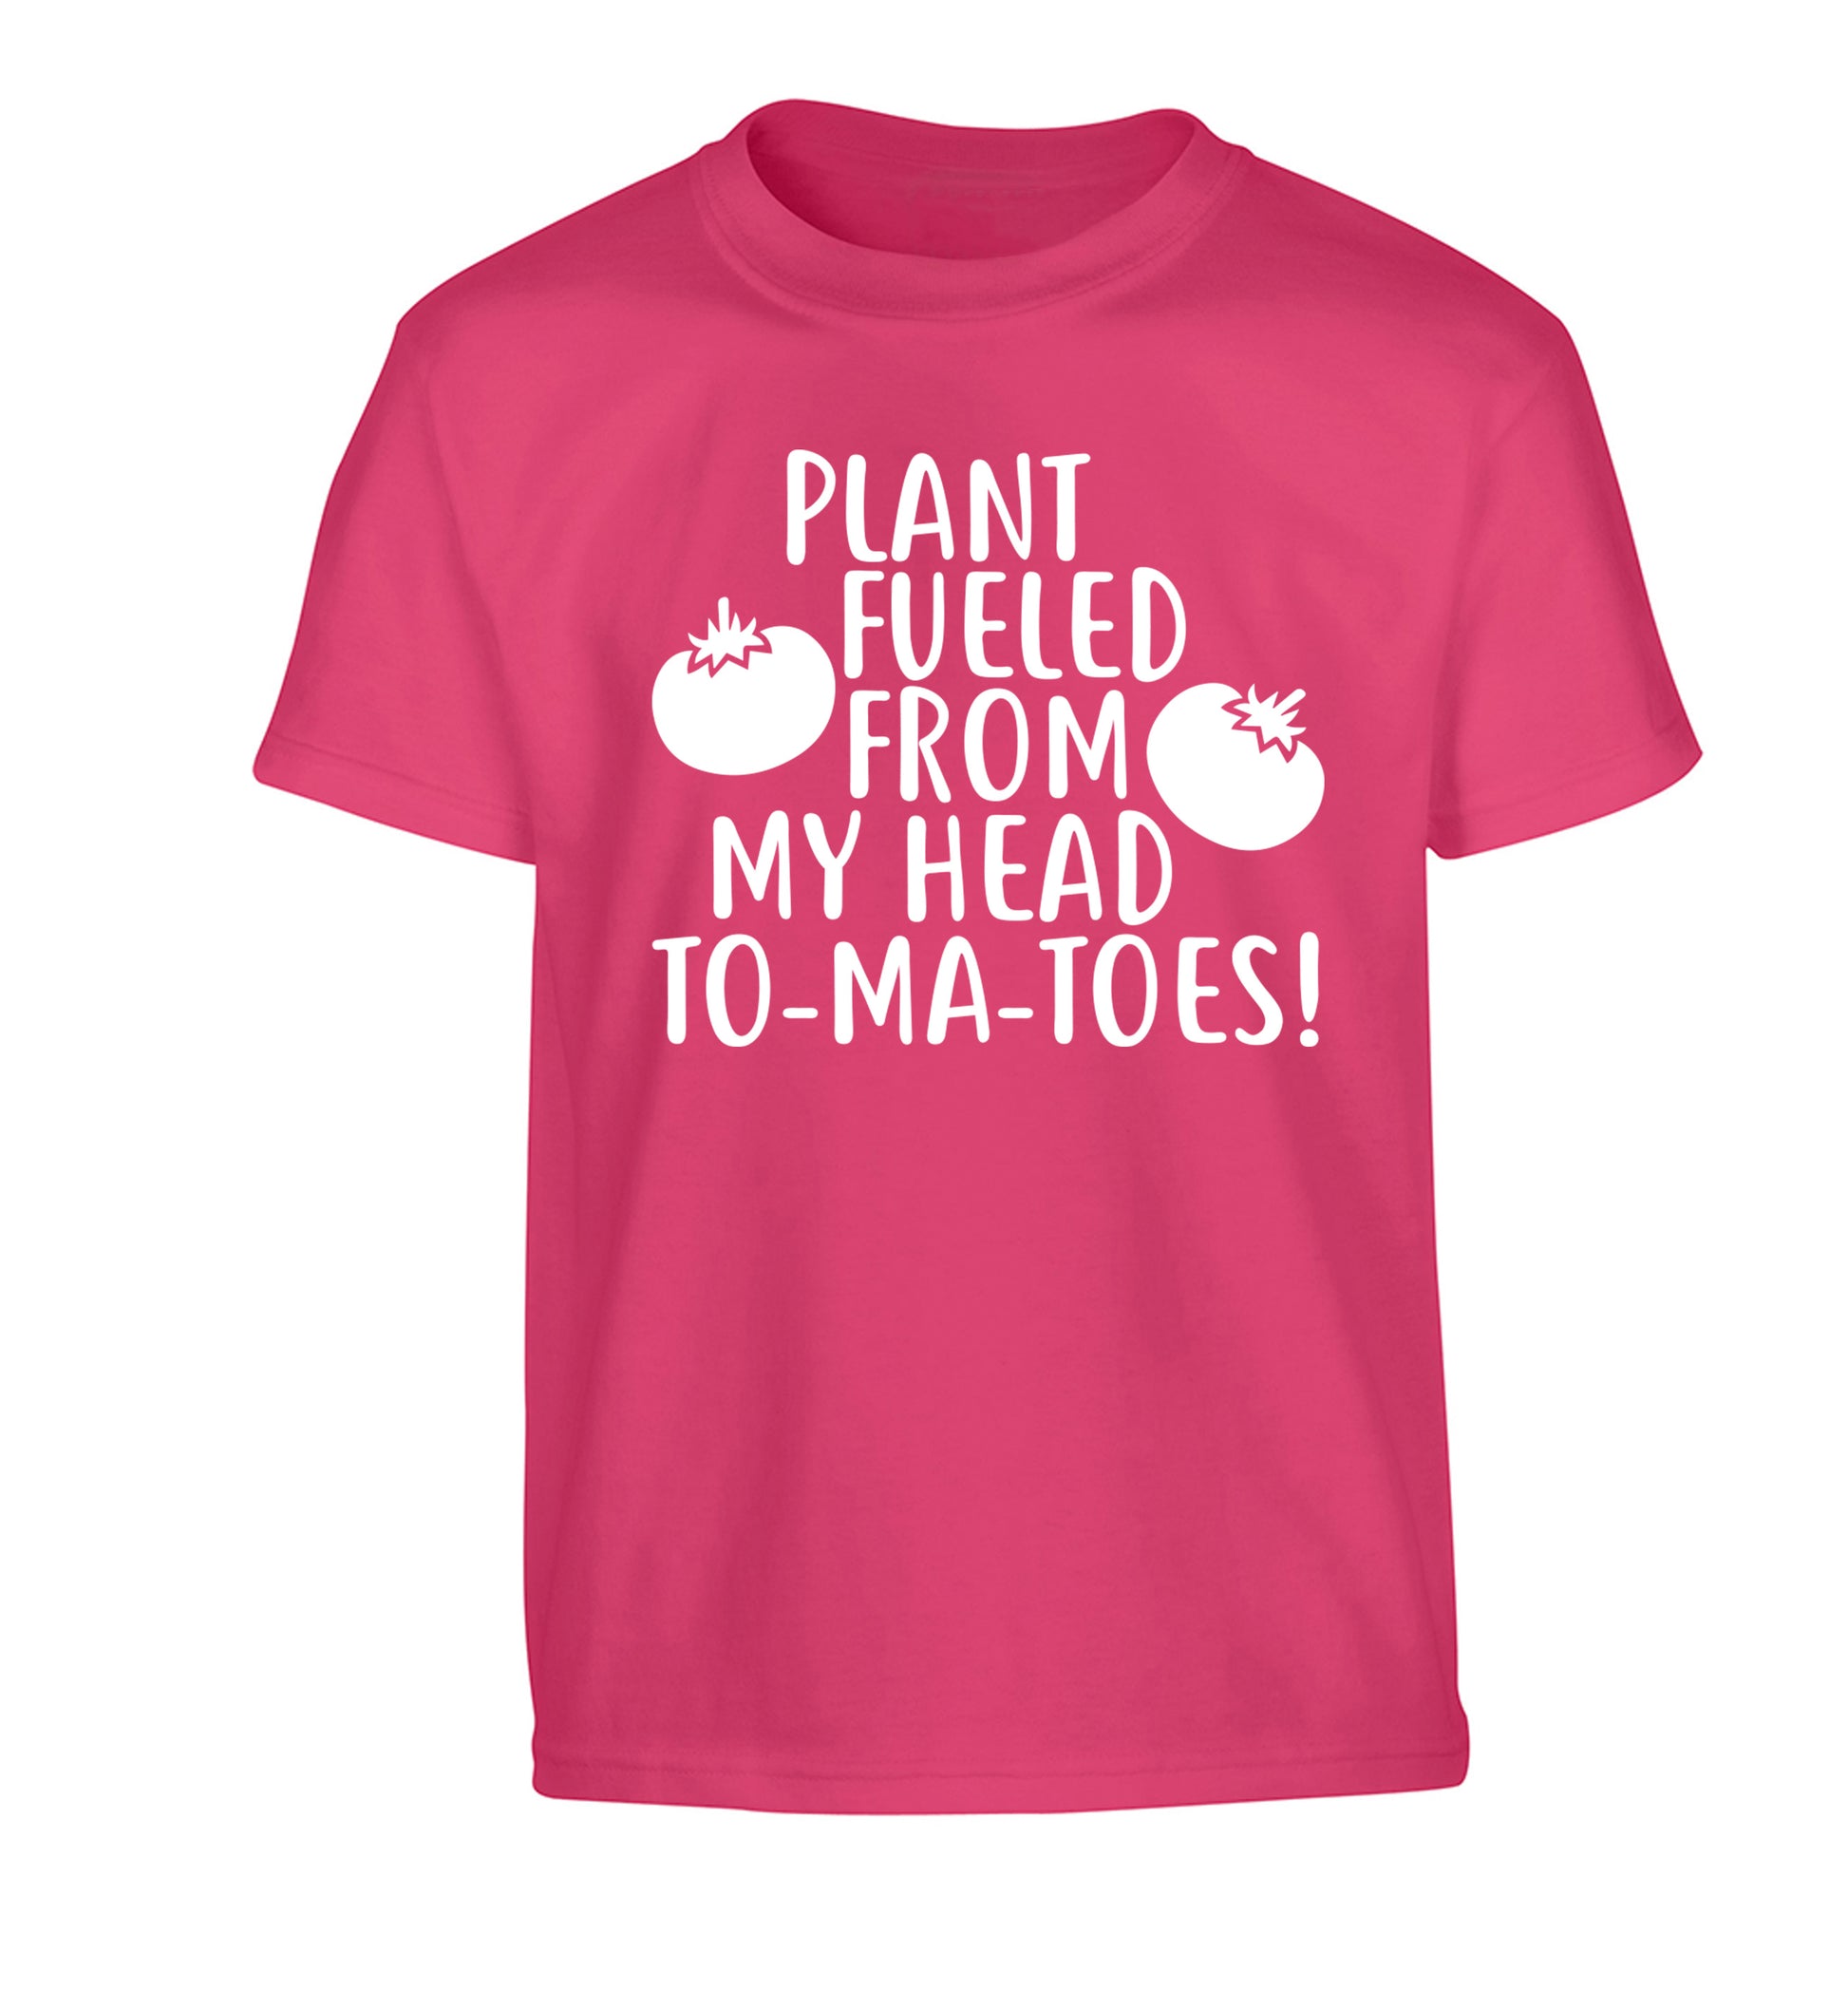 Plant fueled from my head to-ma-toes Children's pink Tshirt 12-14 Years